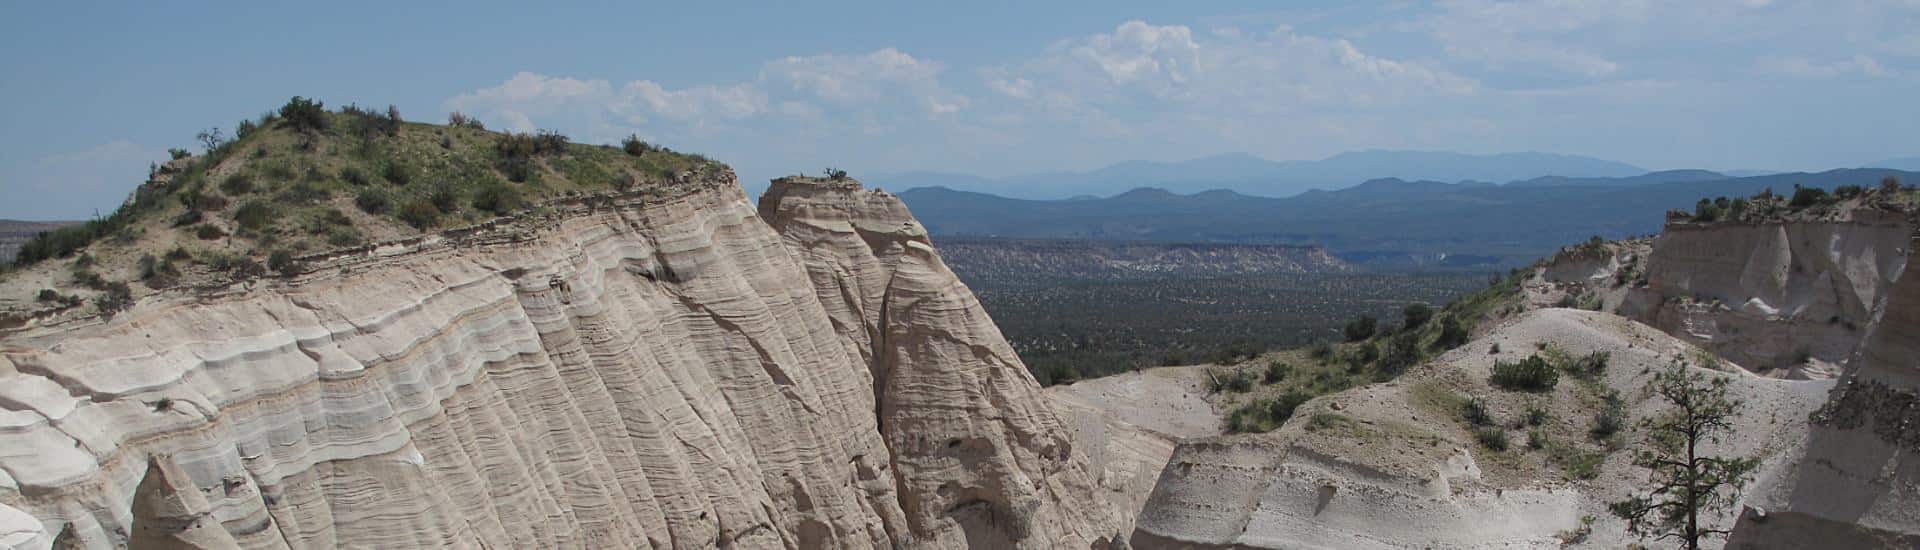 White sandstone mountain cliffs topped with scrub overlooking flatland and mountains in the distance.